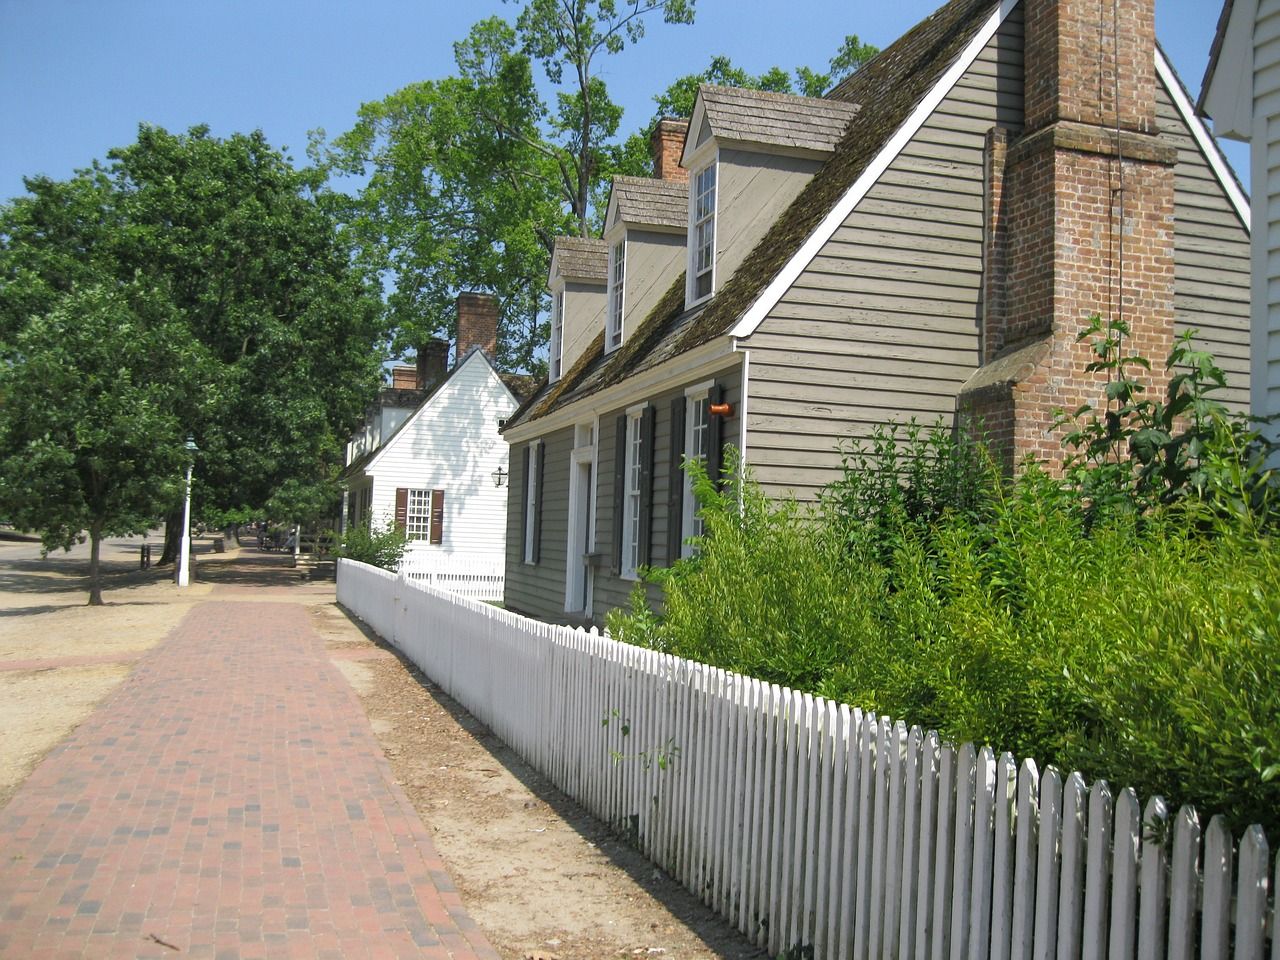 A path in Colonial Williamsburg